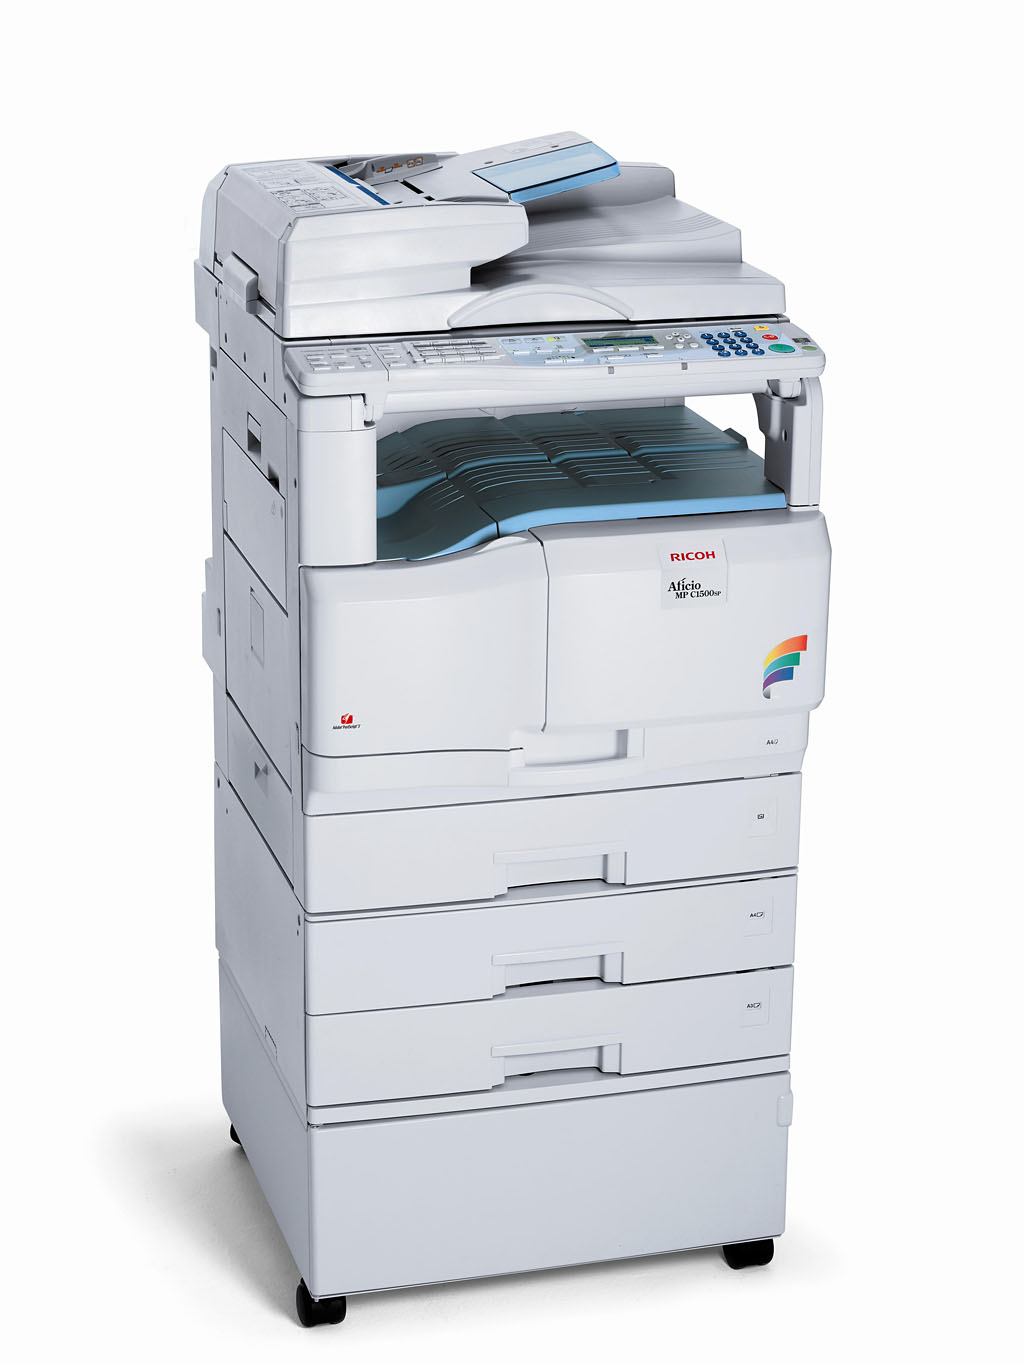 Ricoh Drivers For Mac